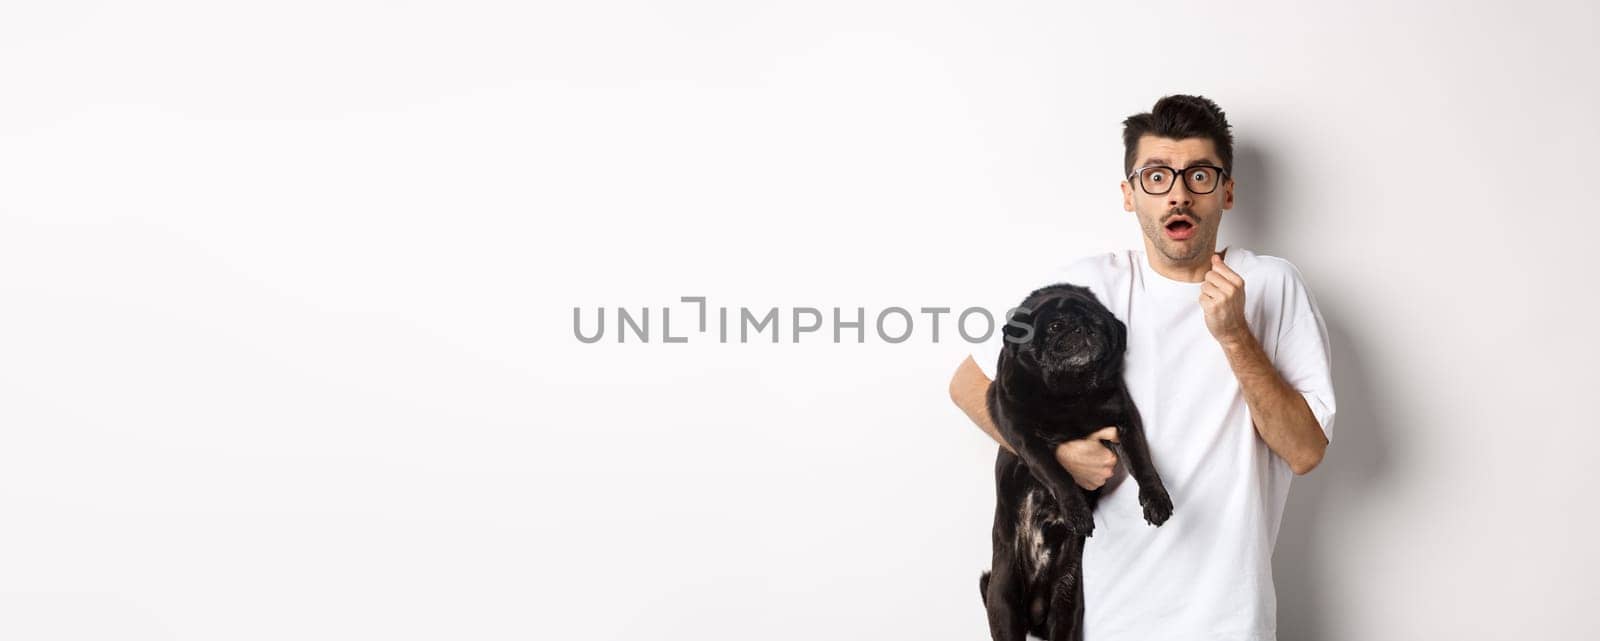 Scared hipster hugging his cute black puppy and staring at camera frightened. Dog owner looking shocked, holding pug, standing over white background.